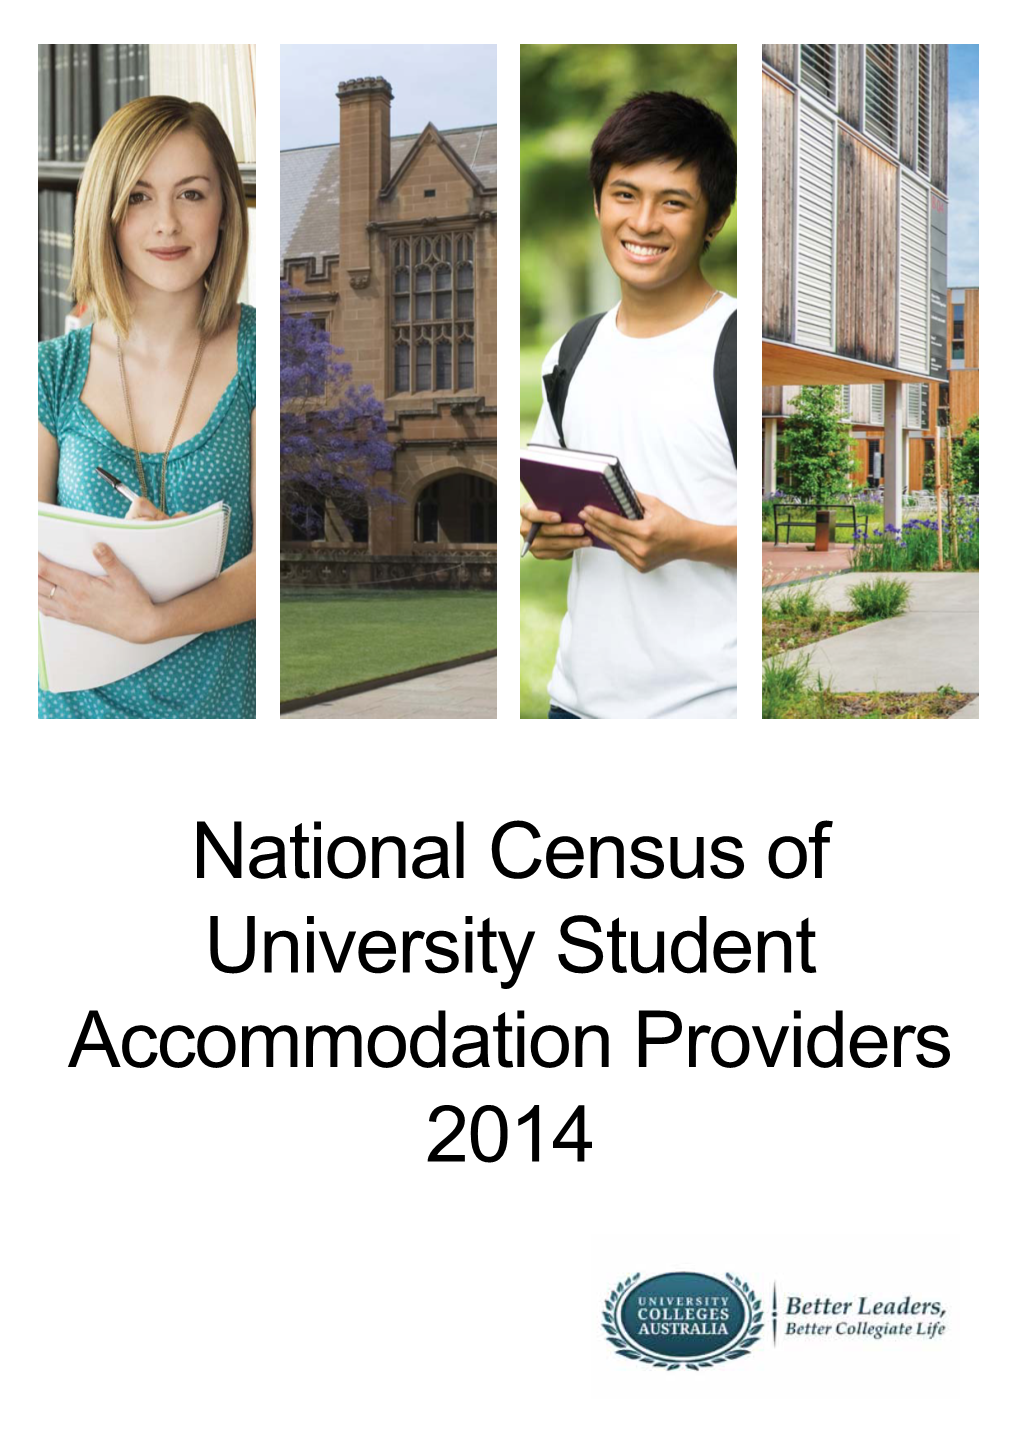 National Census of University Student Accommodation Providers 2014